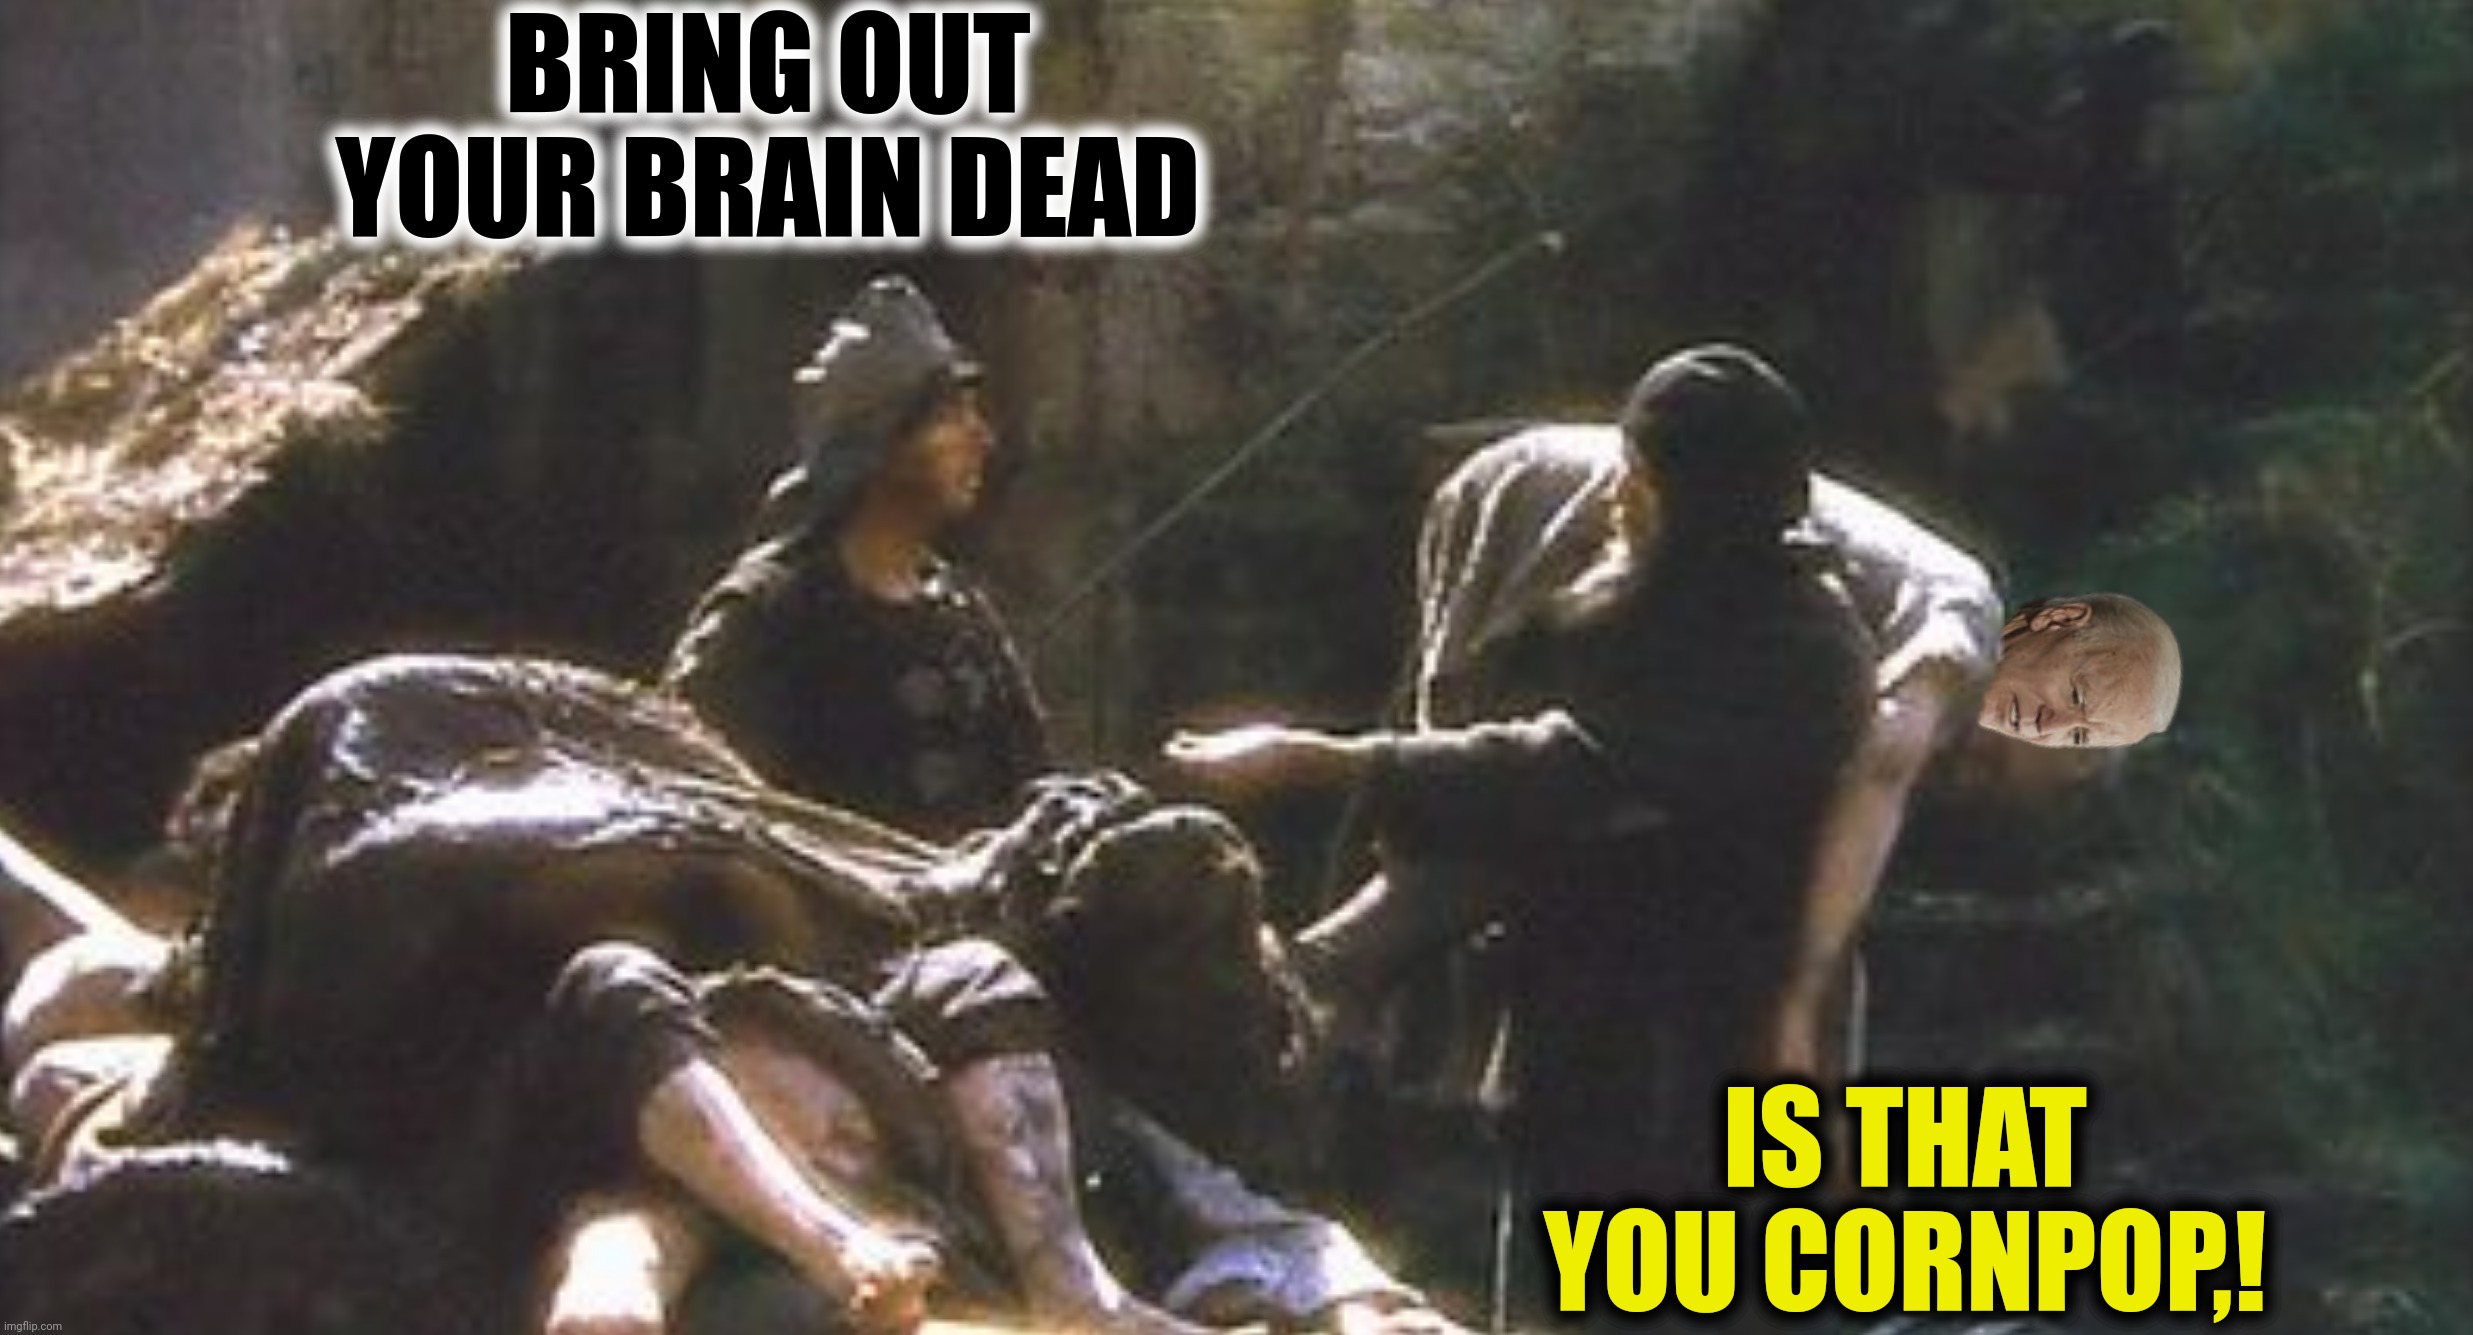 BRING OUT YOUR BRAIN DEAD IS THAT YOU CORNPOP,! | made w/ Imgflip meme maker